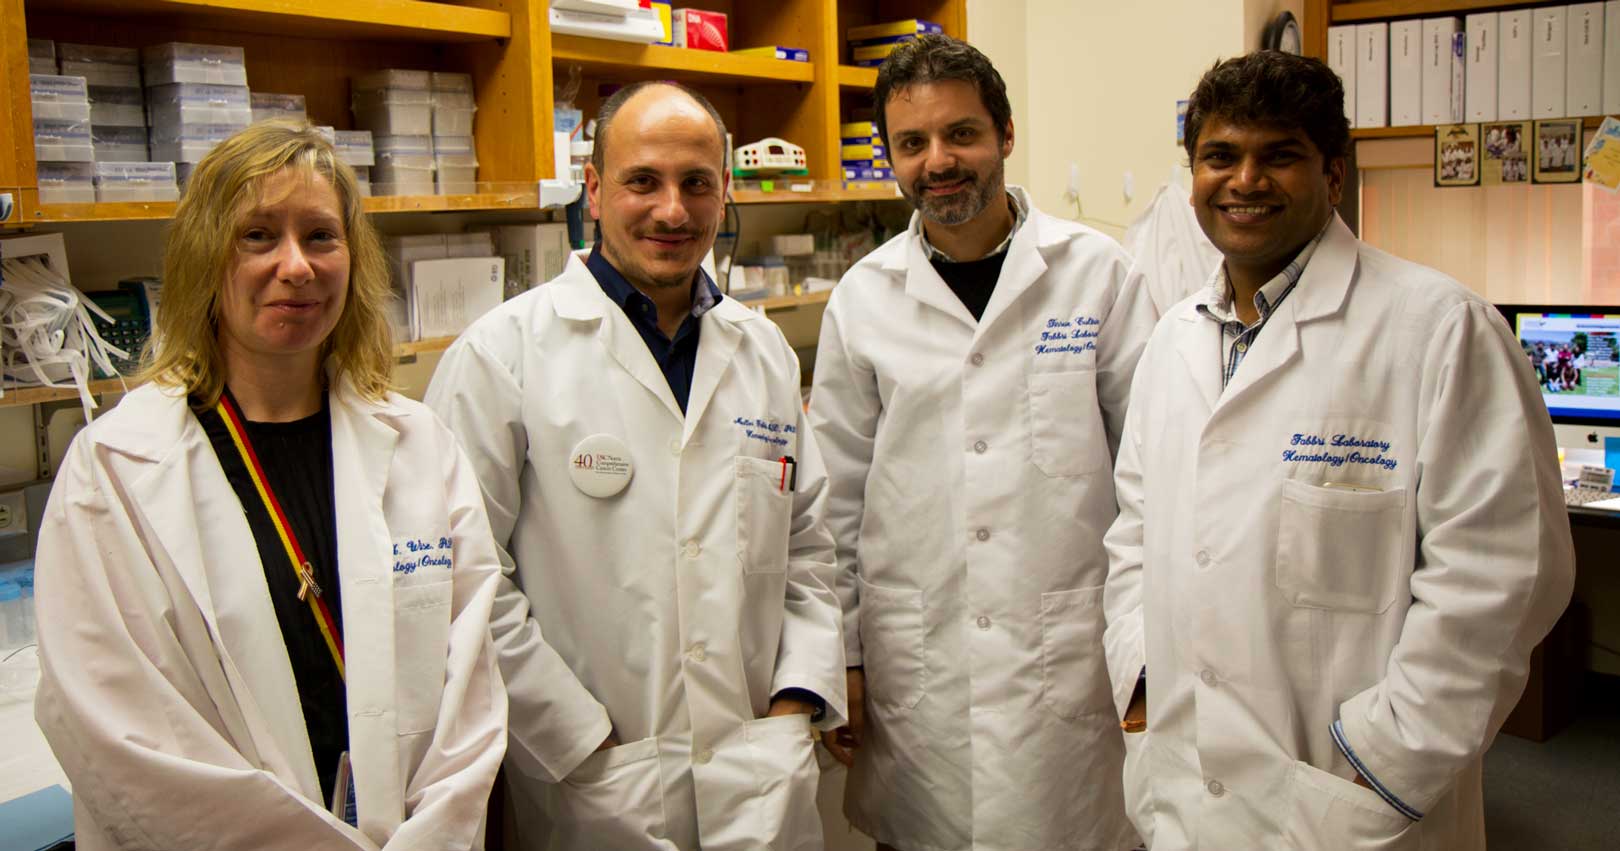 Dr. Fabbri and his colleagues stand together for a photo in the lab